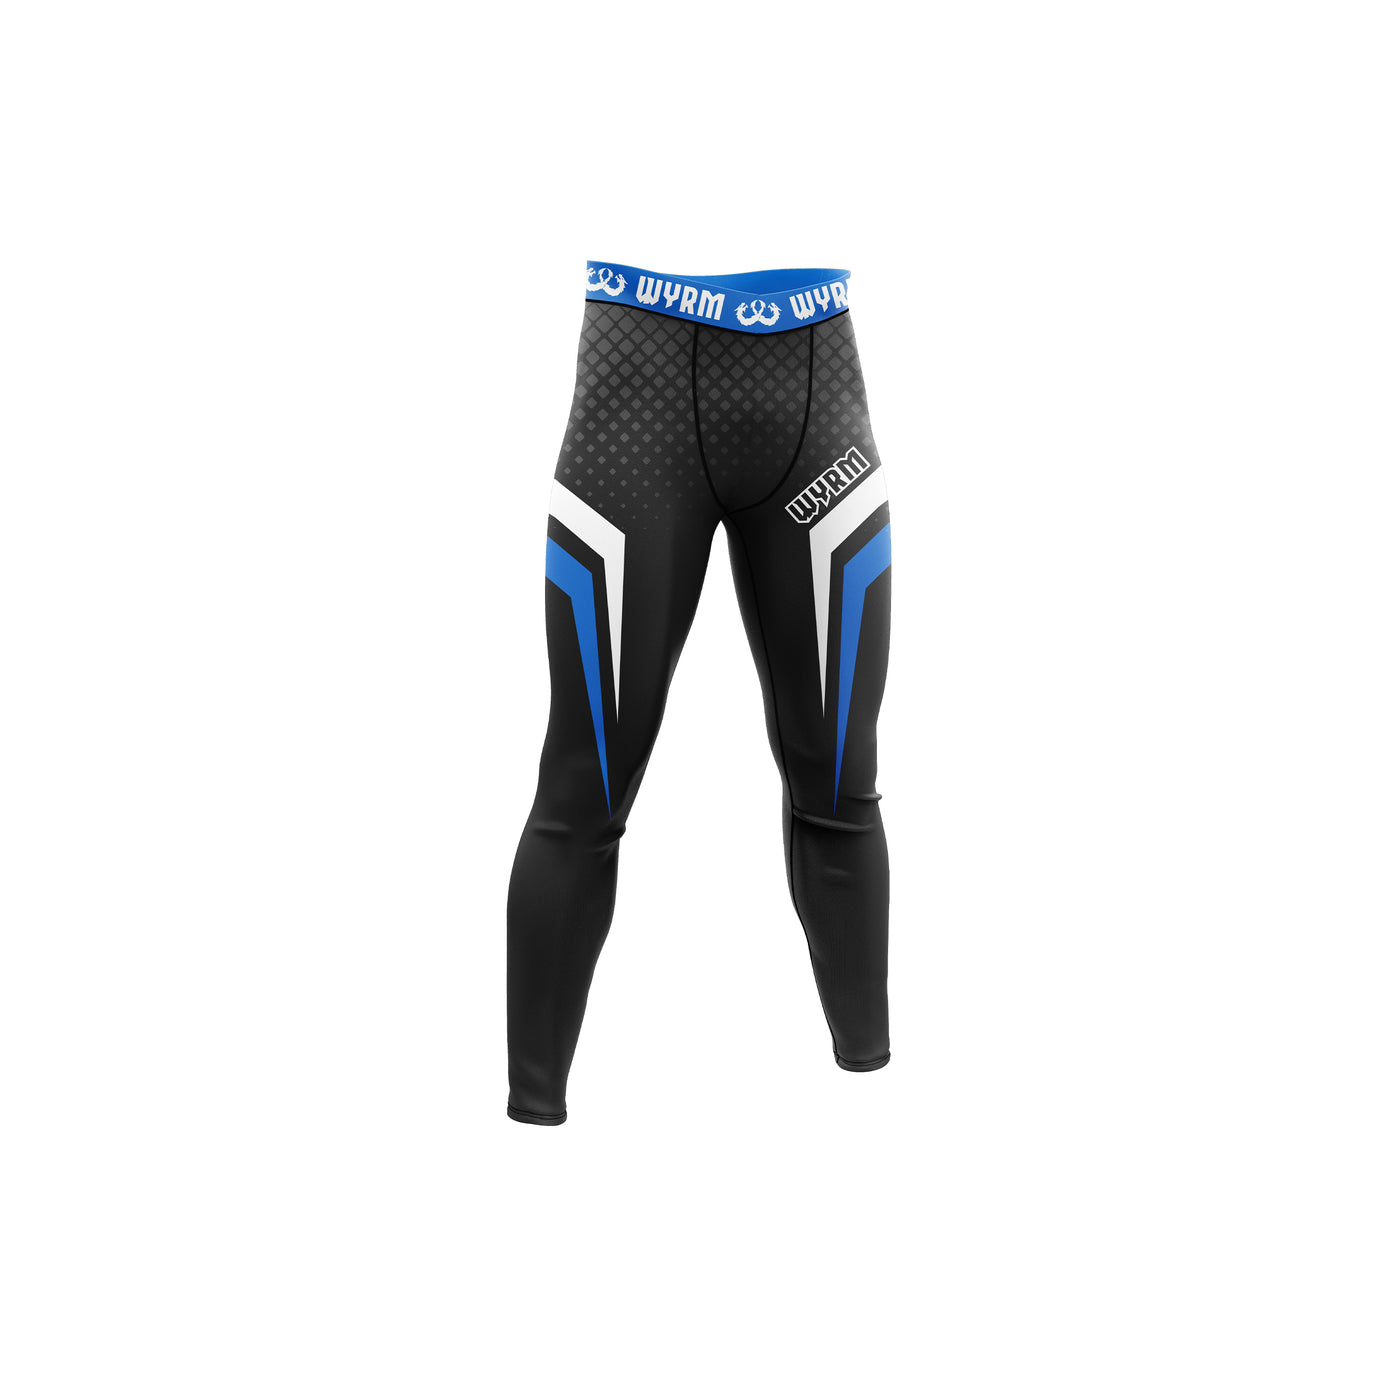 Blueclaw Compression Spats